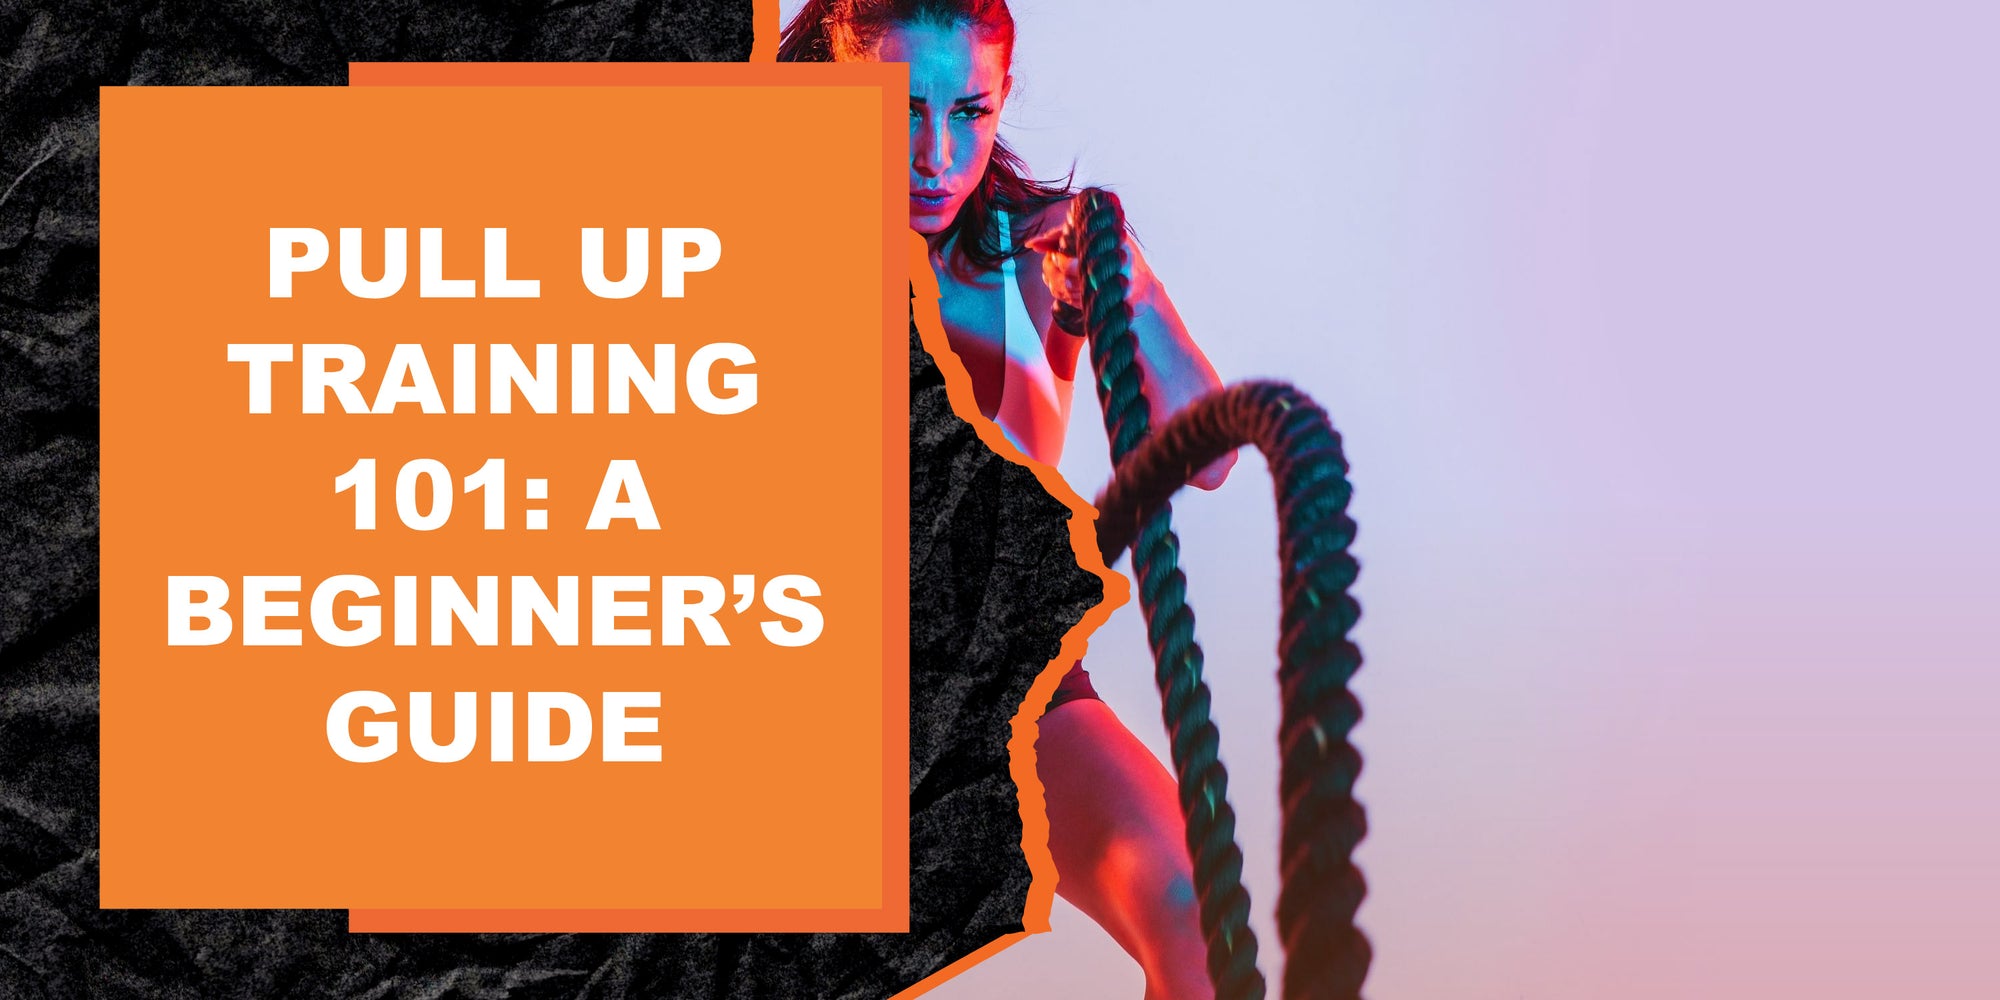 Pull Up Training 101: A Beginner’s Guide